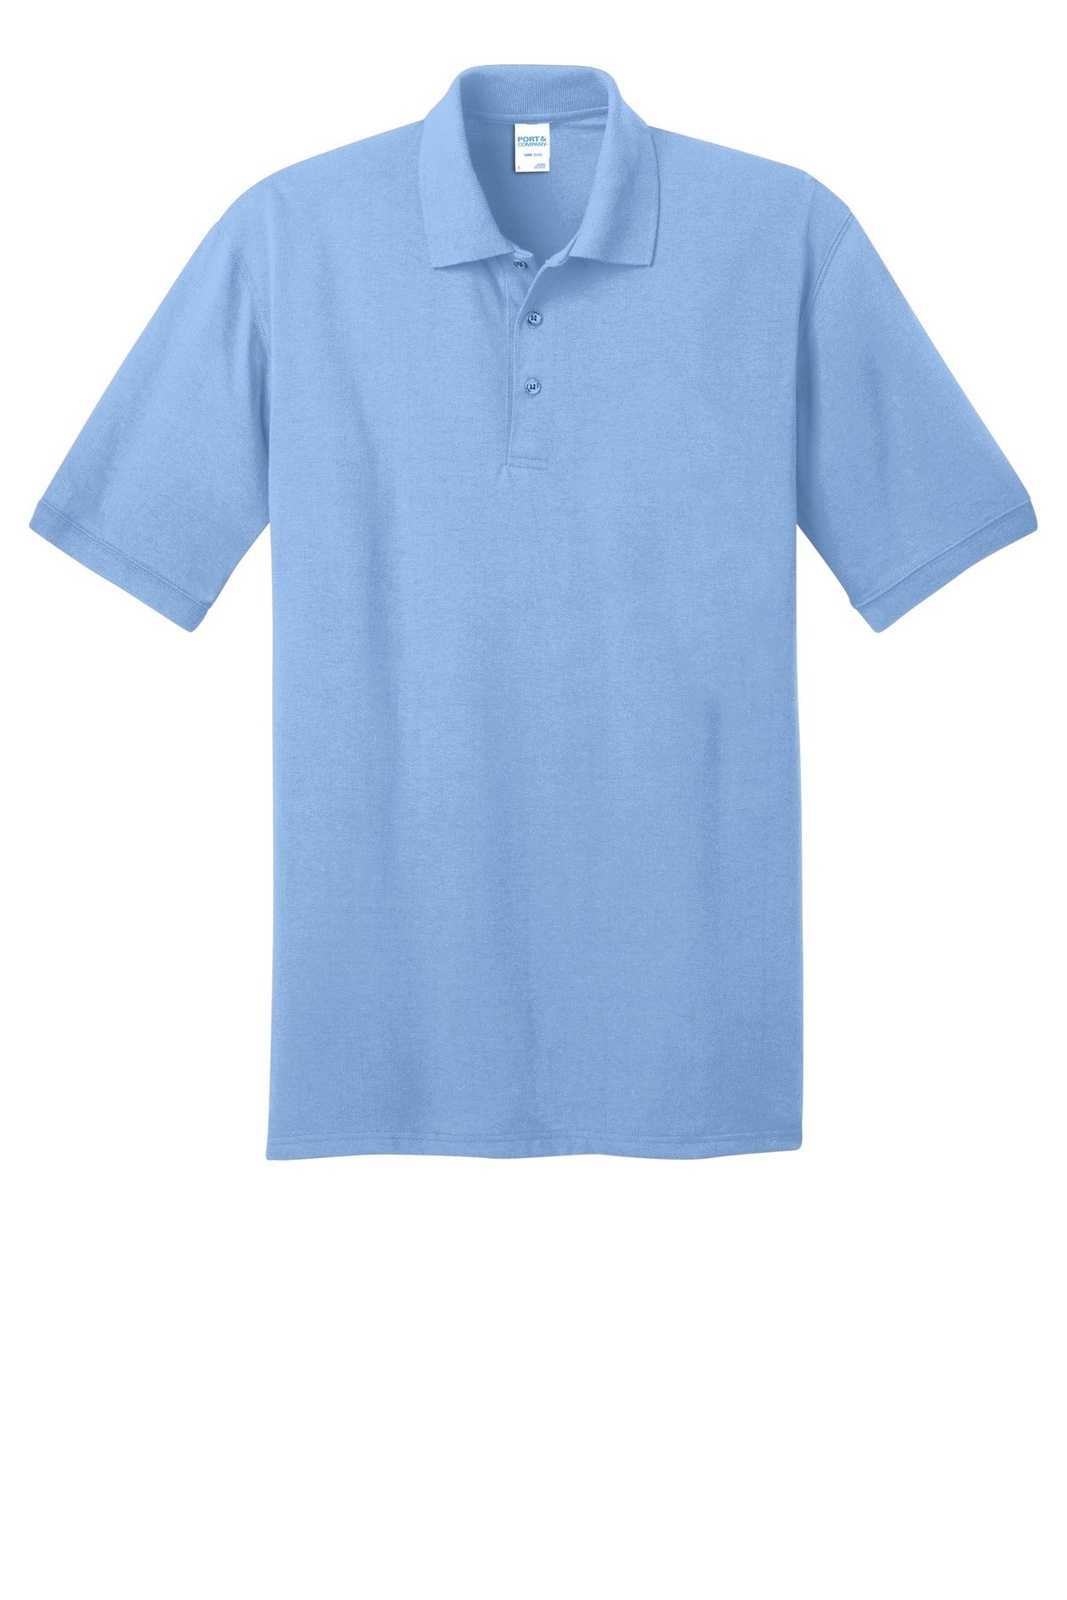 Port &amp; Company KP55T Tall Core Blend Jersey Knit Polo - Light Blue - HIT a Double - 2